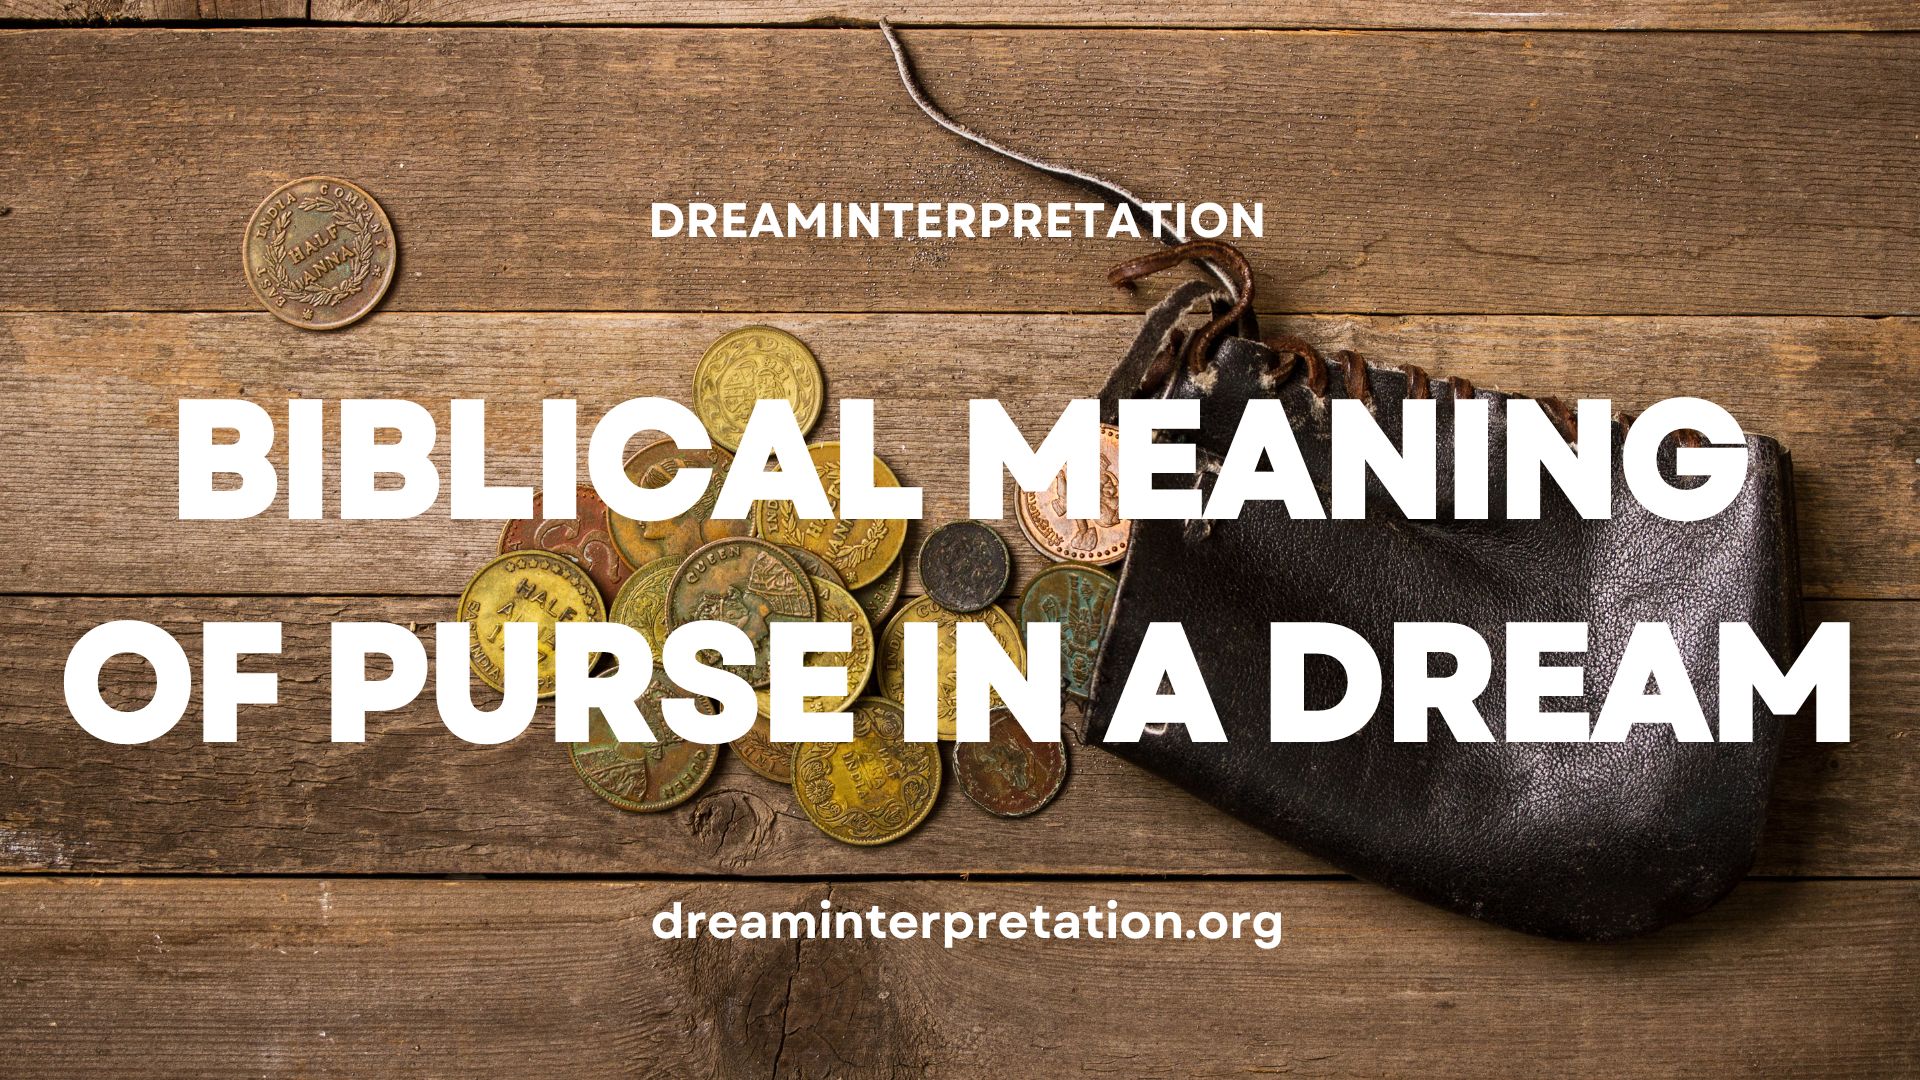 Biblical Meaning of Purse in a Dream